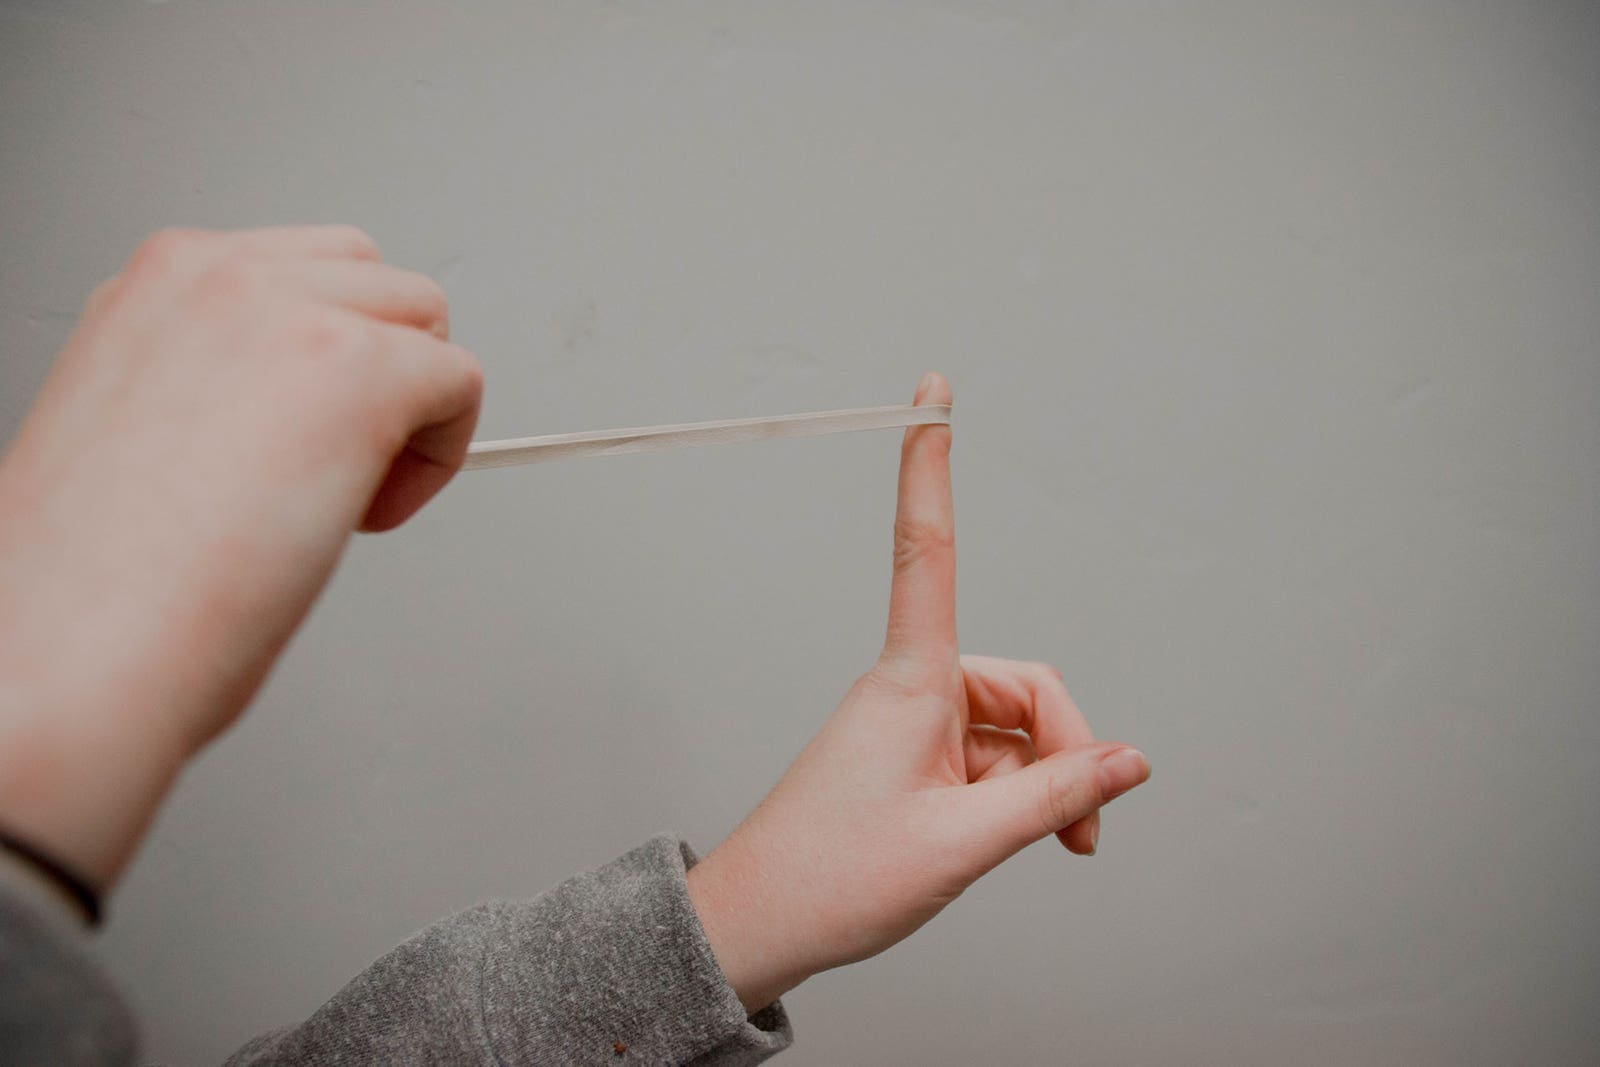 fingers shooting rubber band